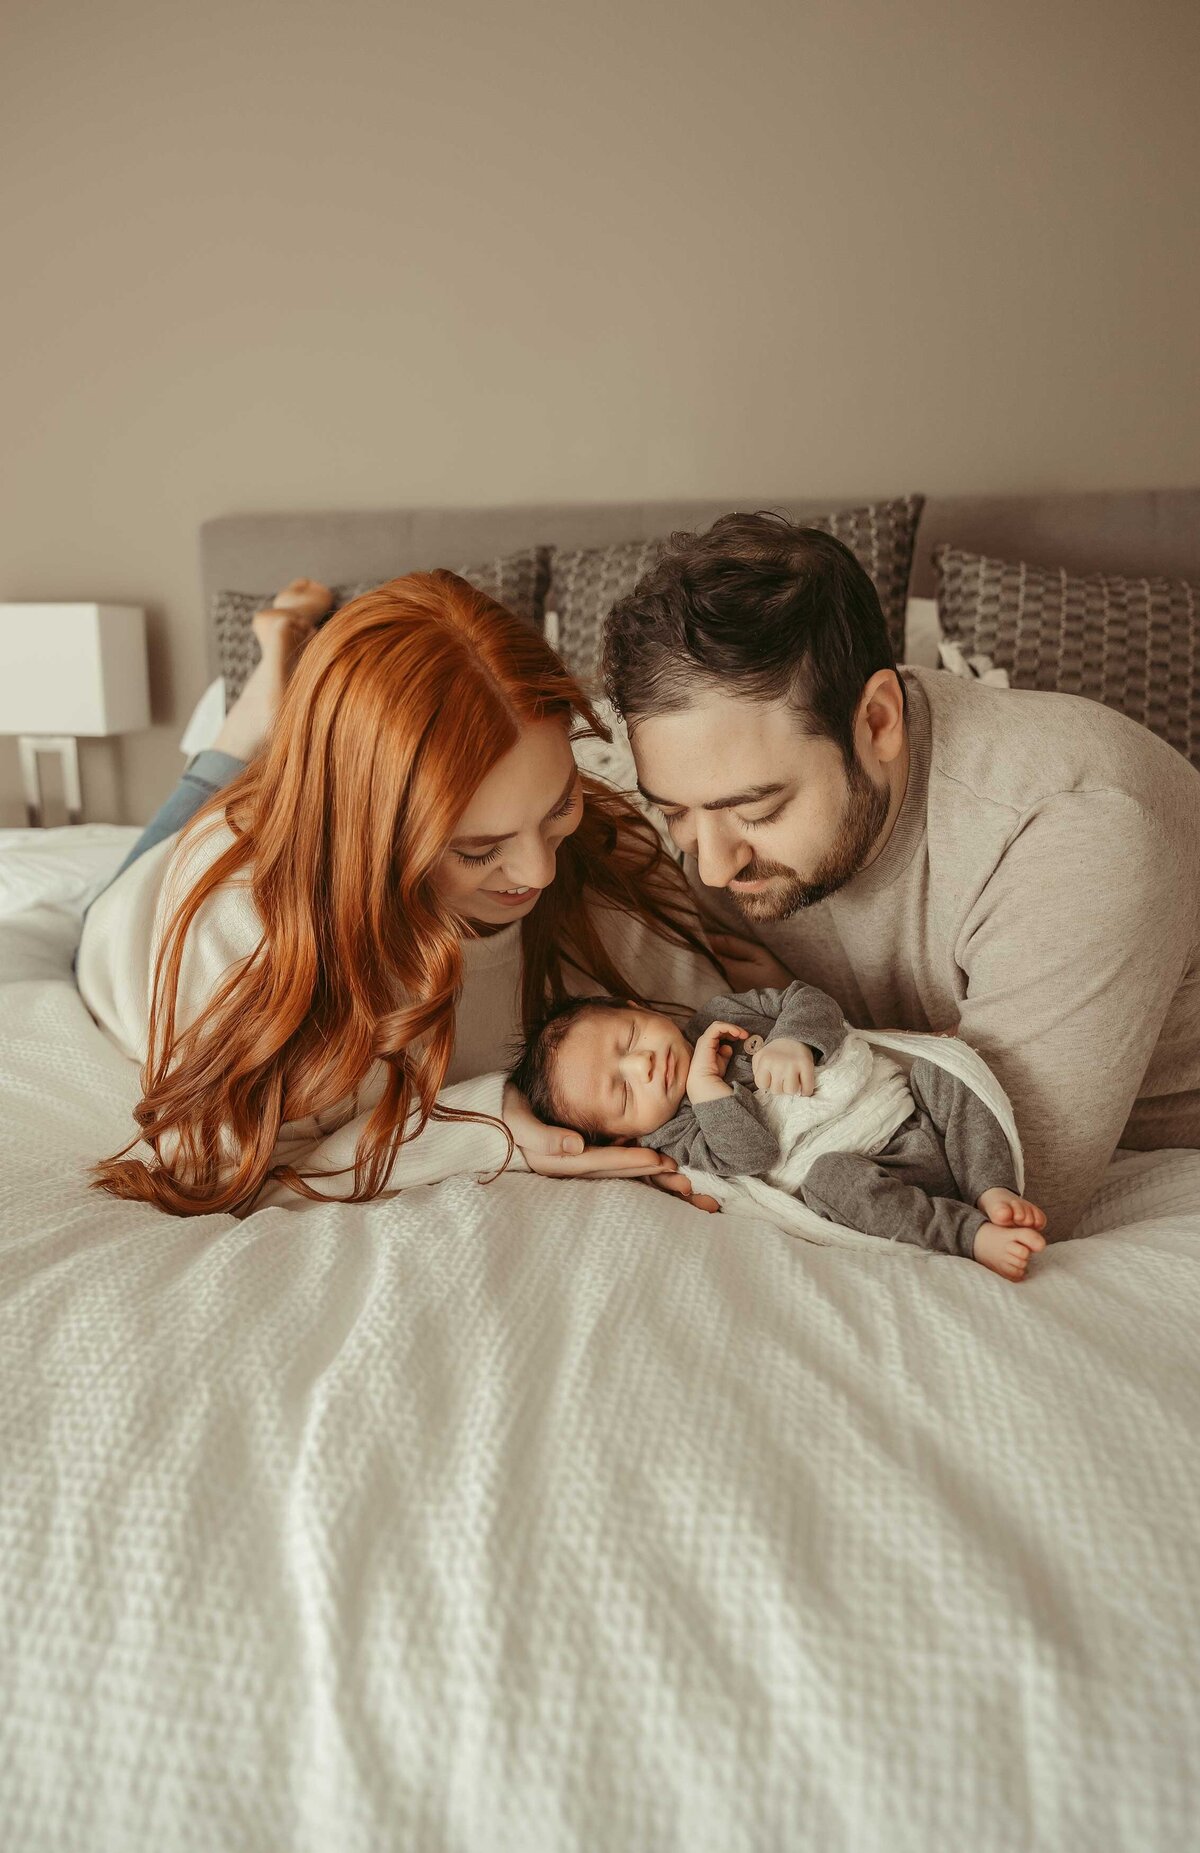 woman with red hair and her partner are on a bed looking at their newborn baby who is wearing a gray onesie